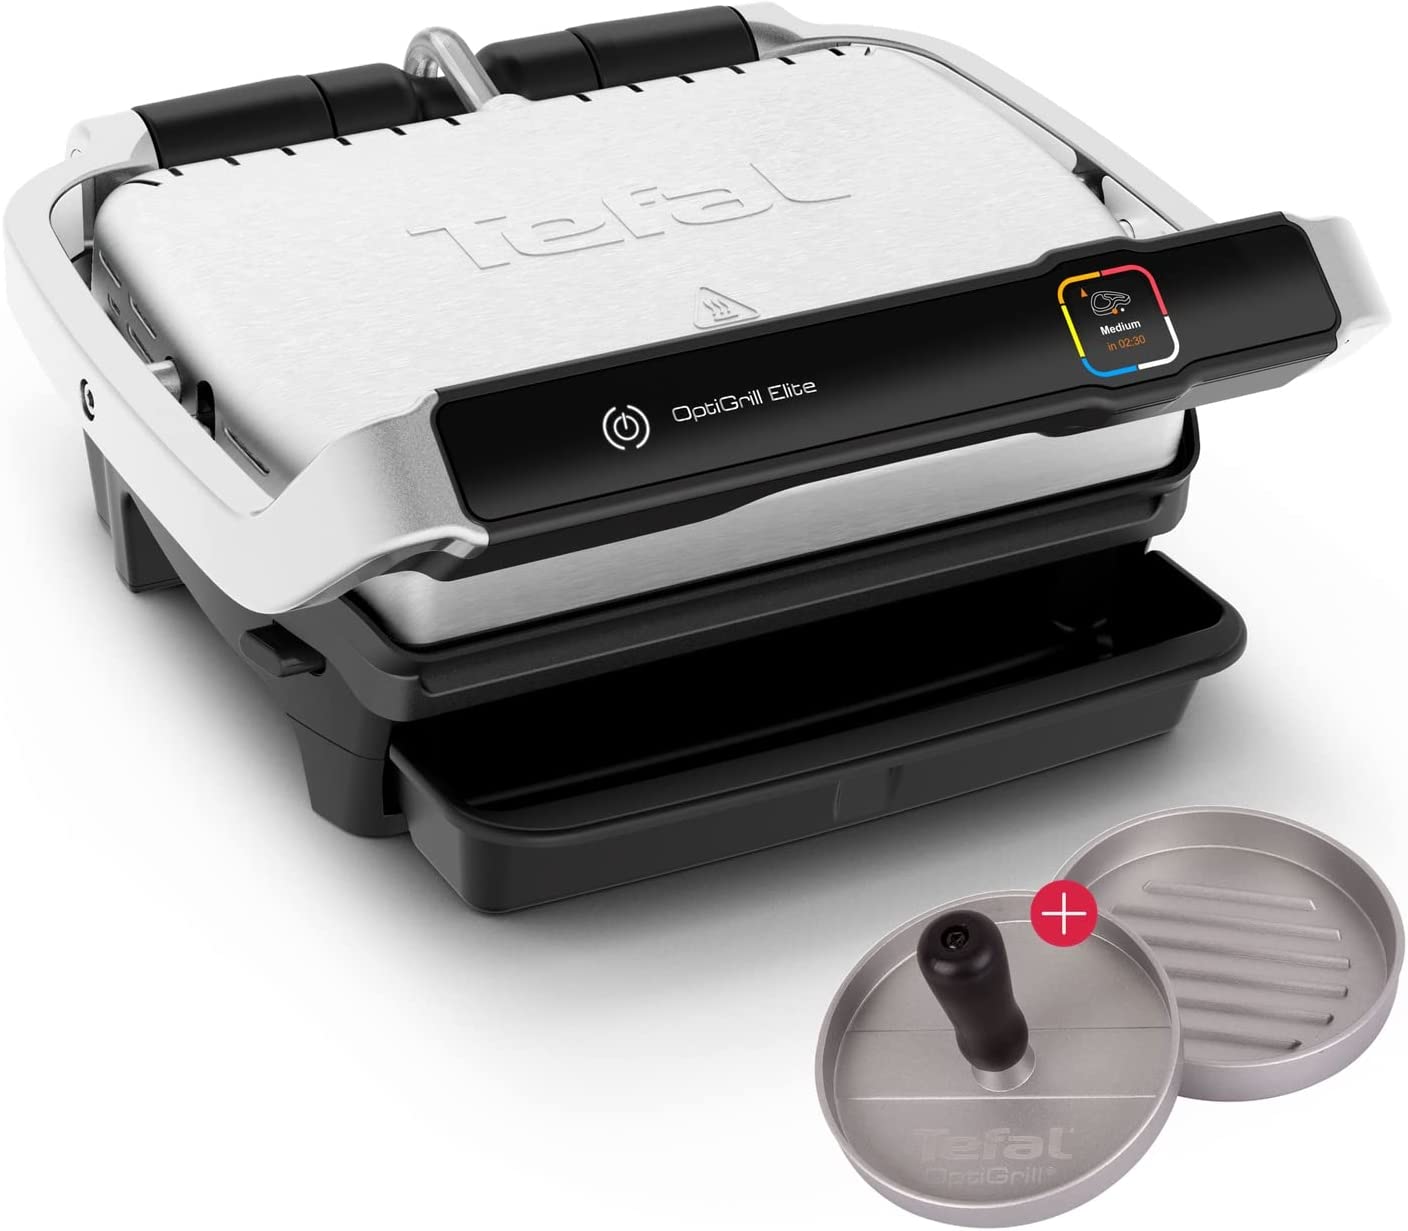 Tefal Optigrill Elite Contact Grill with Grill Boost Function 2000 W + W875 Hamburger Press Indoor Electric Grill 12 Automatic Programmes Intuitive Sensor Touch Display Stainless Steel Powerful